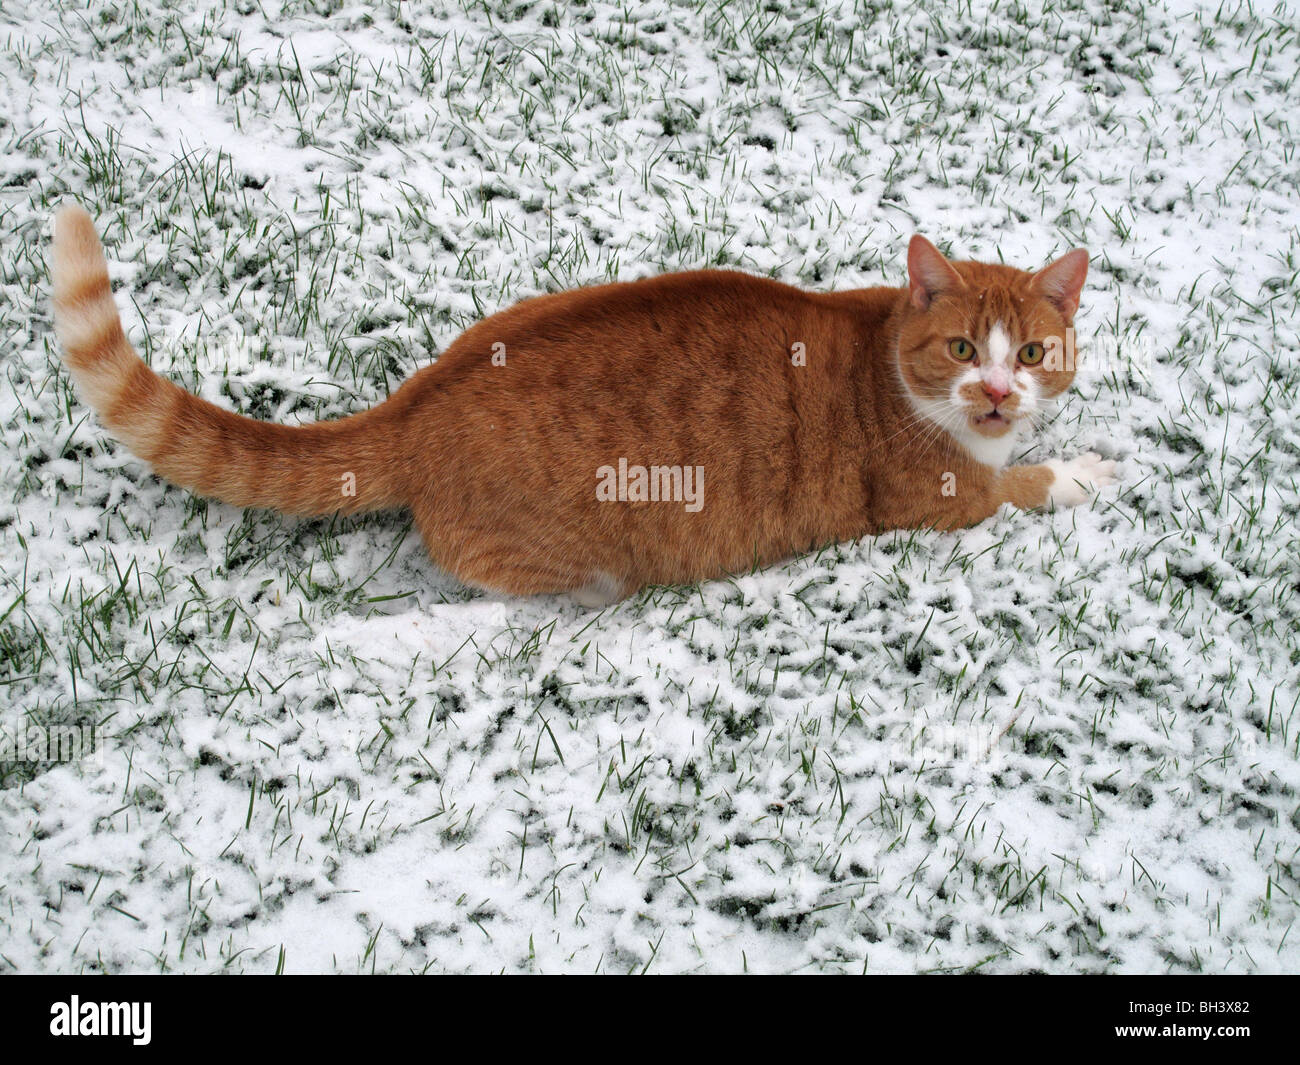 A ginger cat alert in a light fresh snow covering the grass Stock Photo